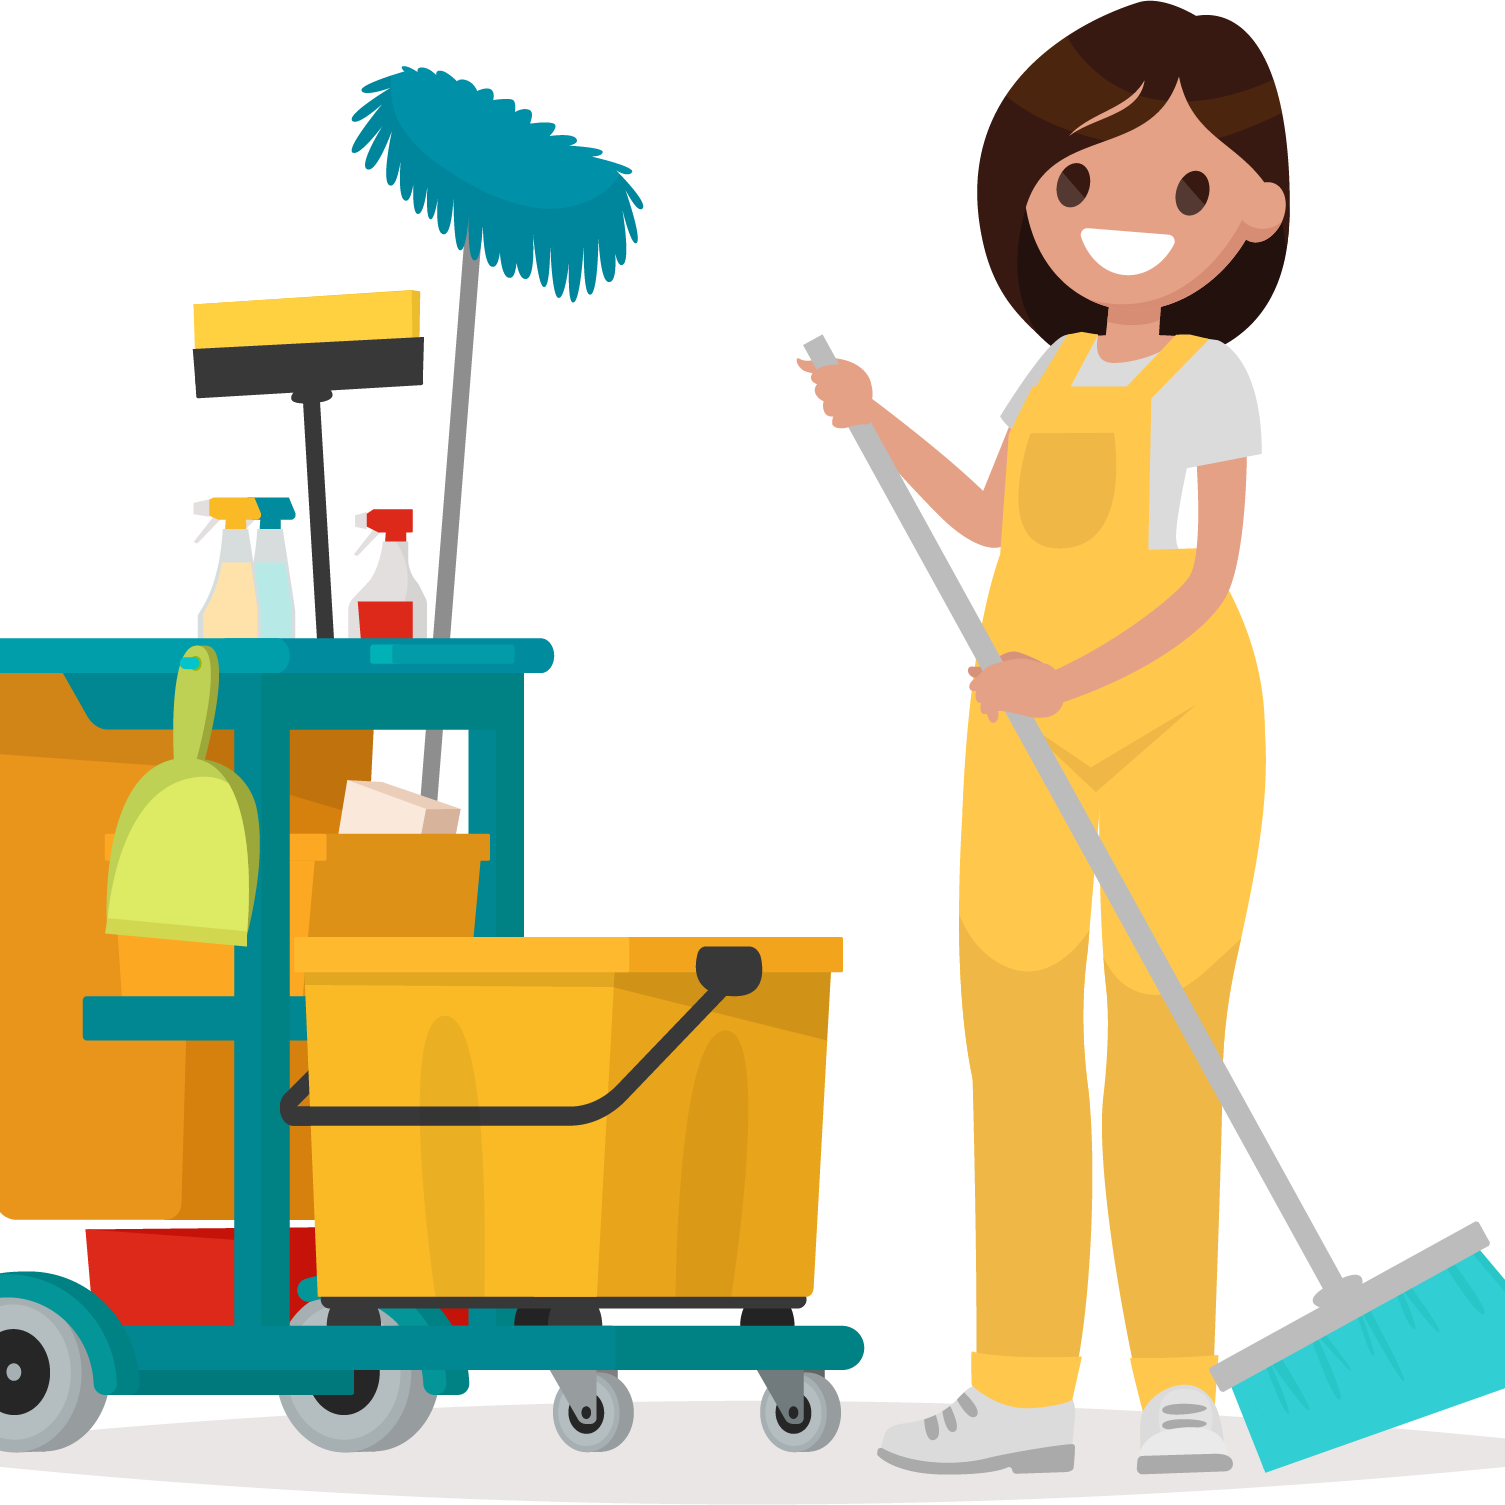 kisspng-janitor-cleaner-maid-service-commercial-cleaning-5b757e3cd18302.4234161215344266848582